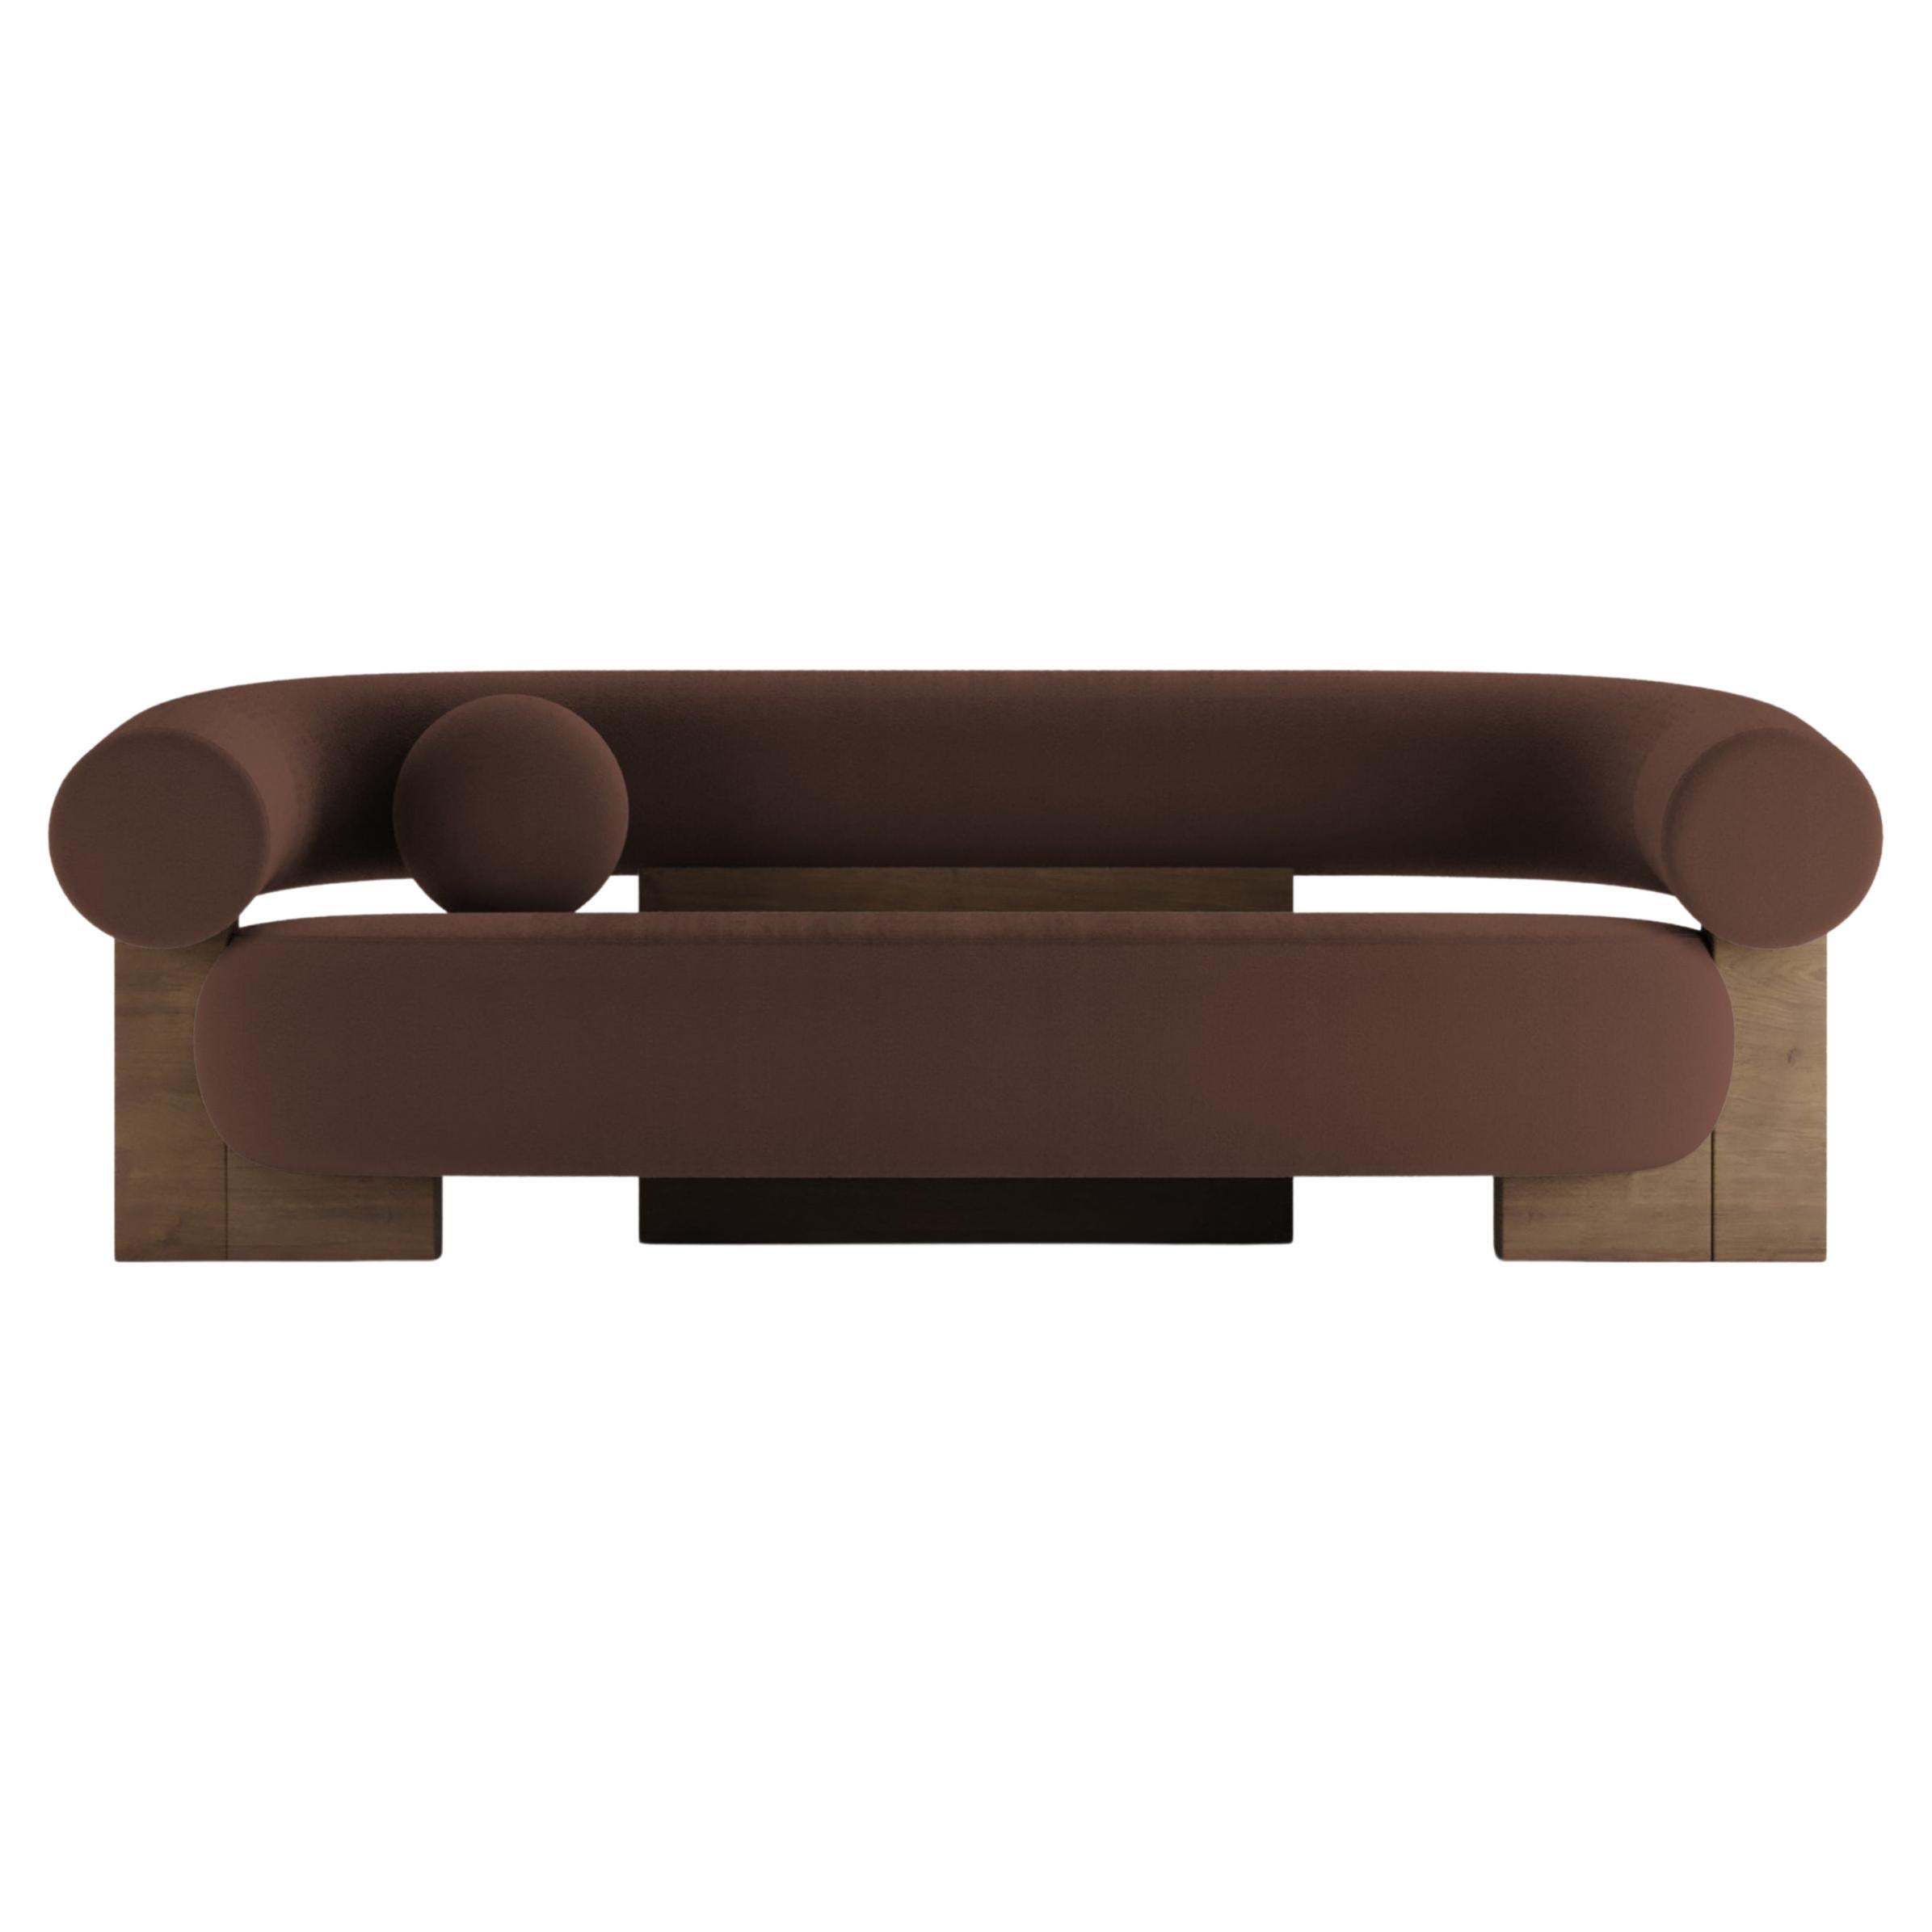 Contemporary Modern Cassete Sofa in Dark Brown & Wood by Collector Studio For Sale